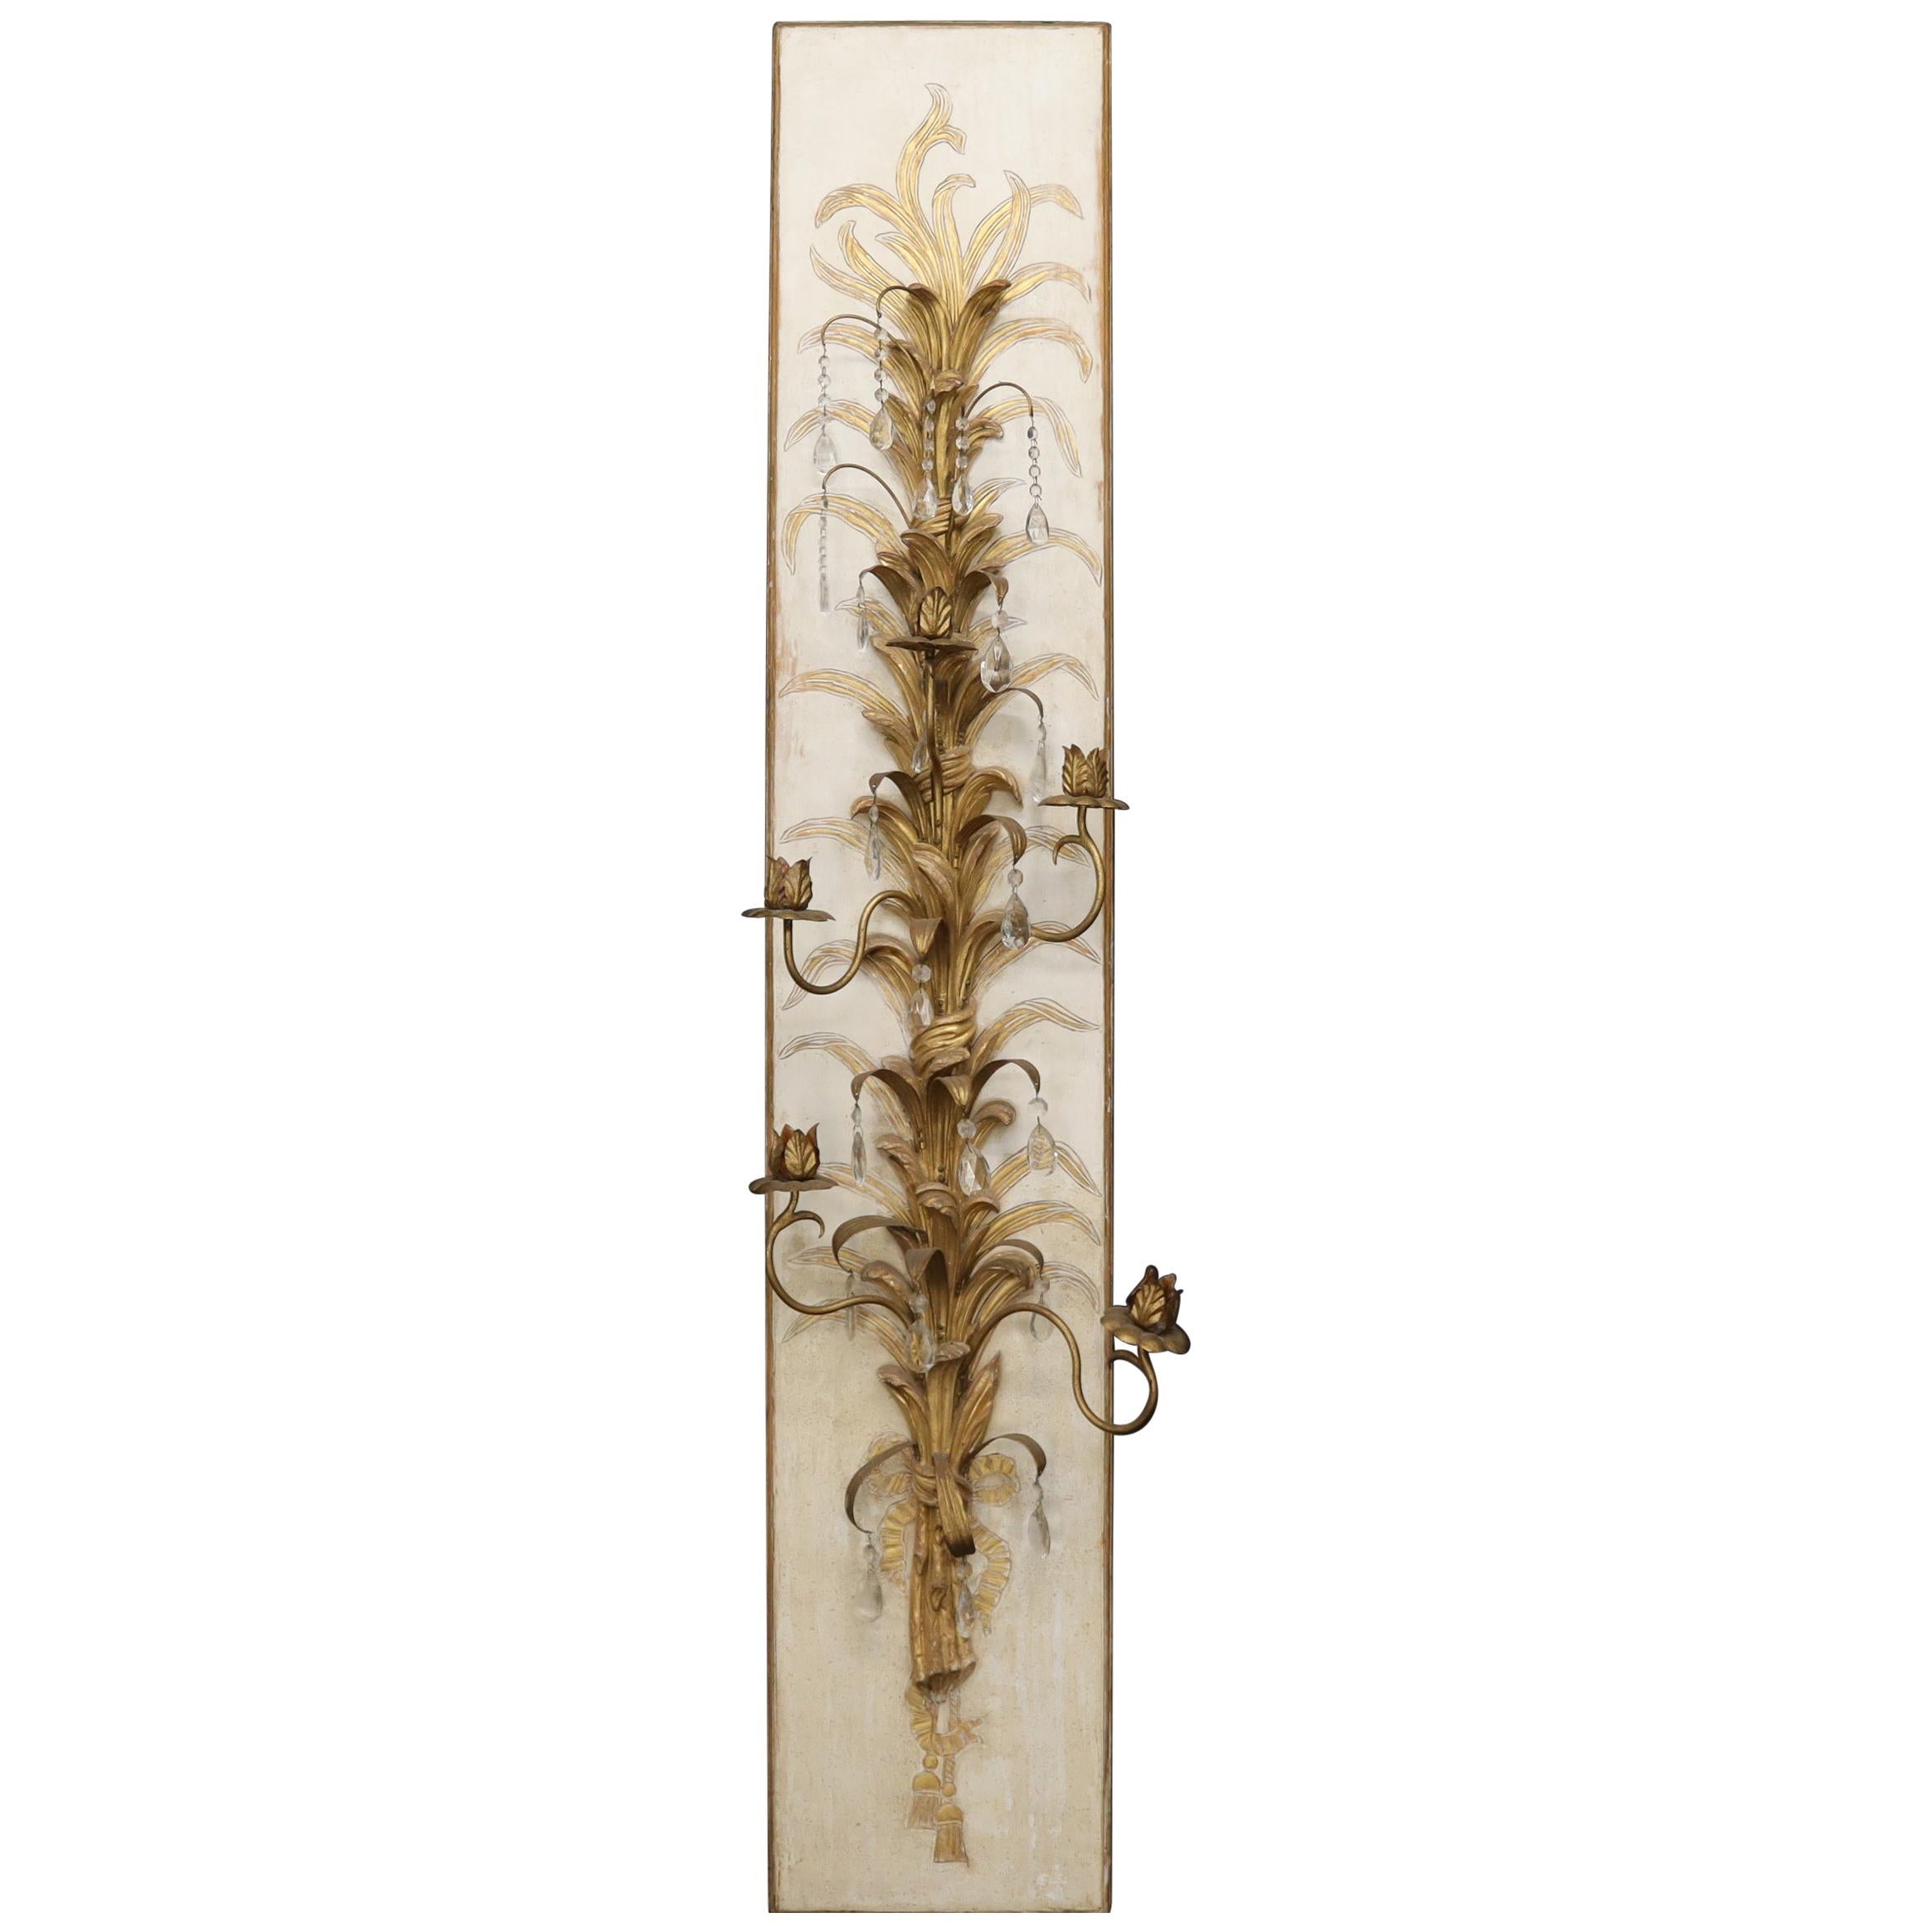 Very Large Tall Gold Gilt Metal Crystal Decorated Wall Candle Holders Sconce For Sale